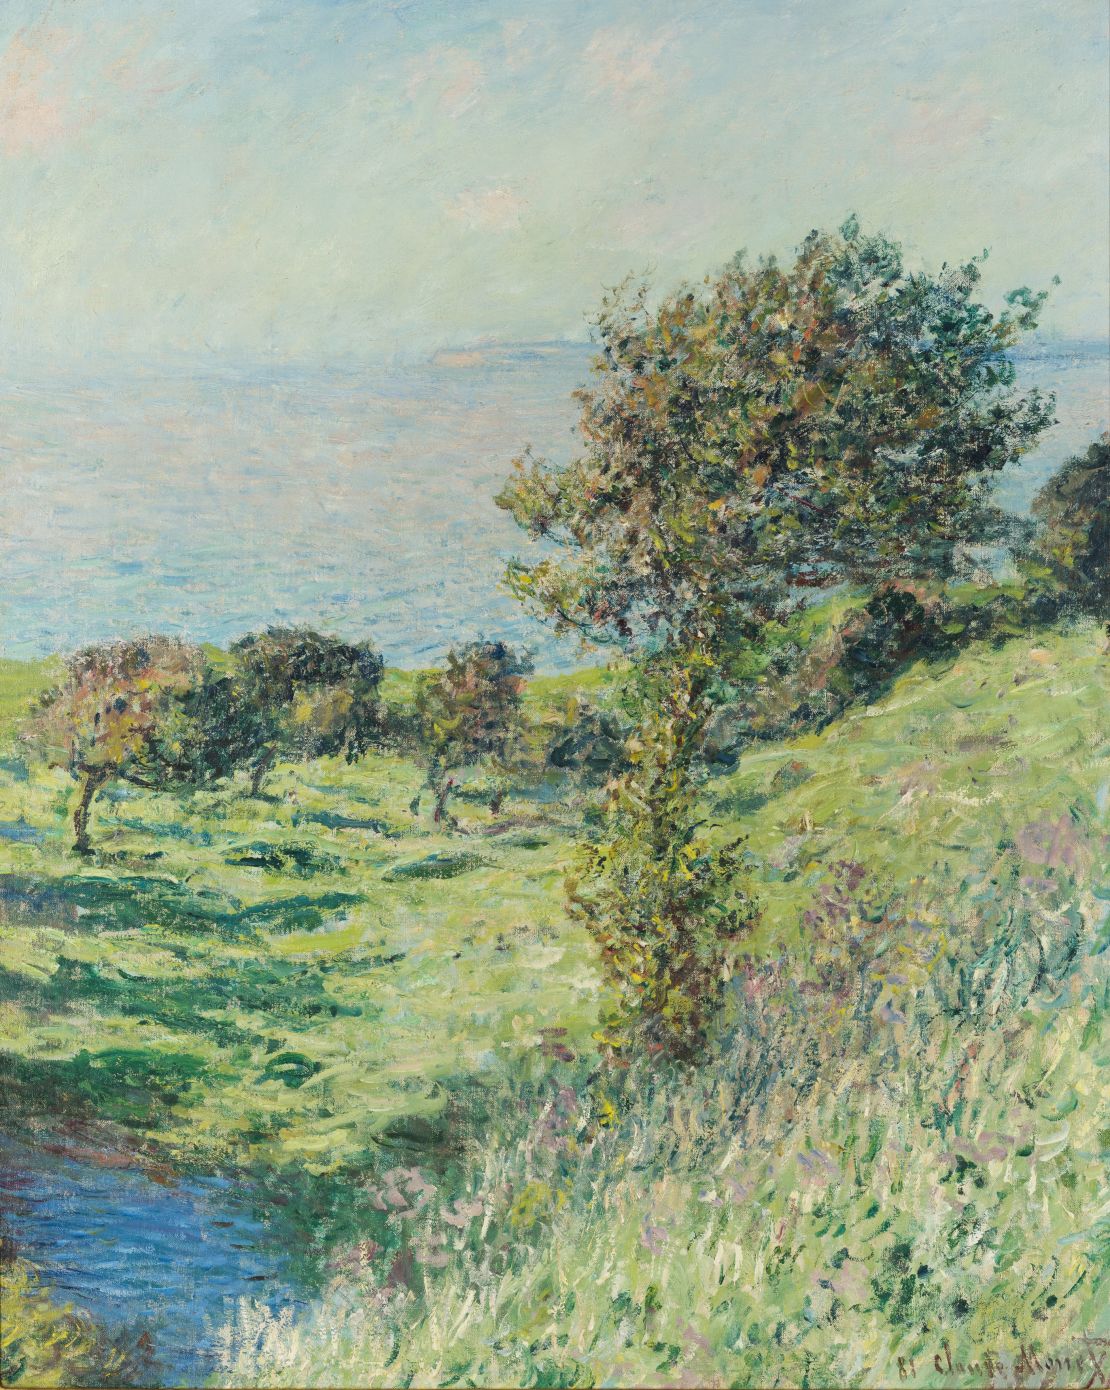 Masterworks recently purchased Monet's "Coup de vent" and is planning to sell the painting via $20 shares.